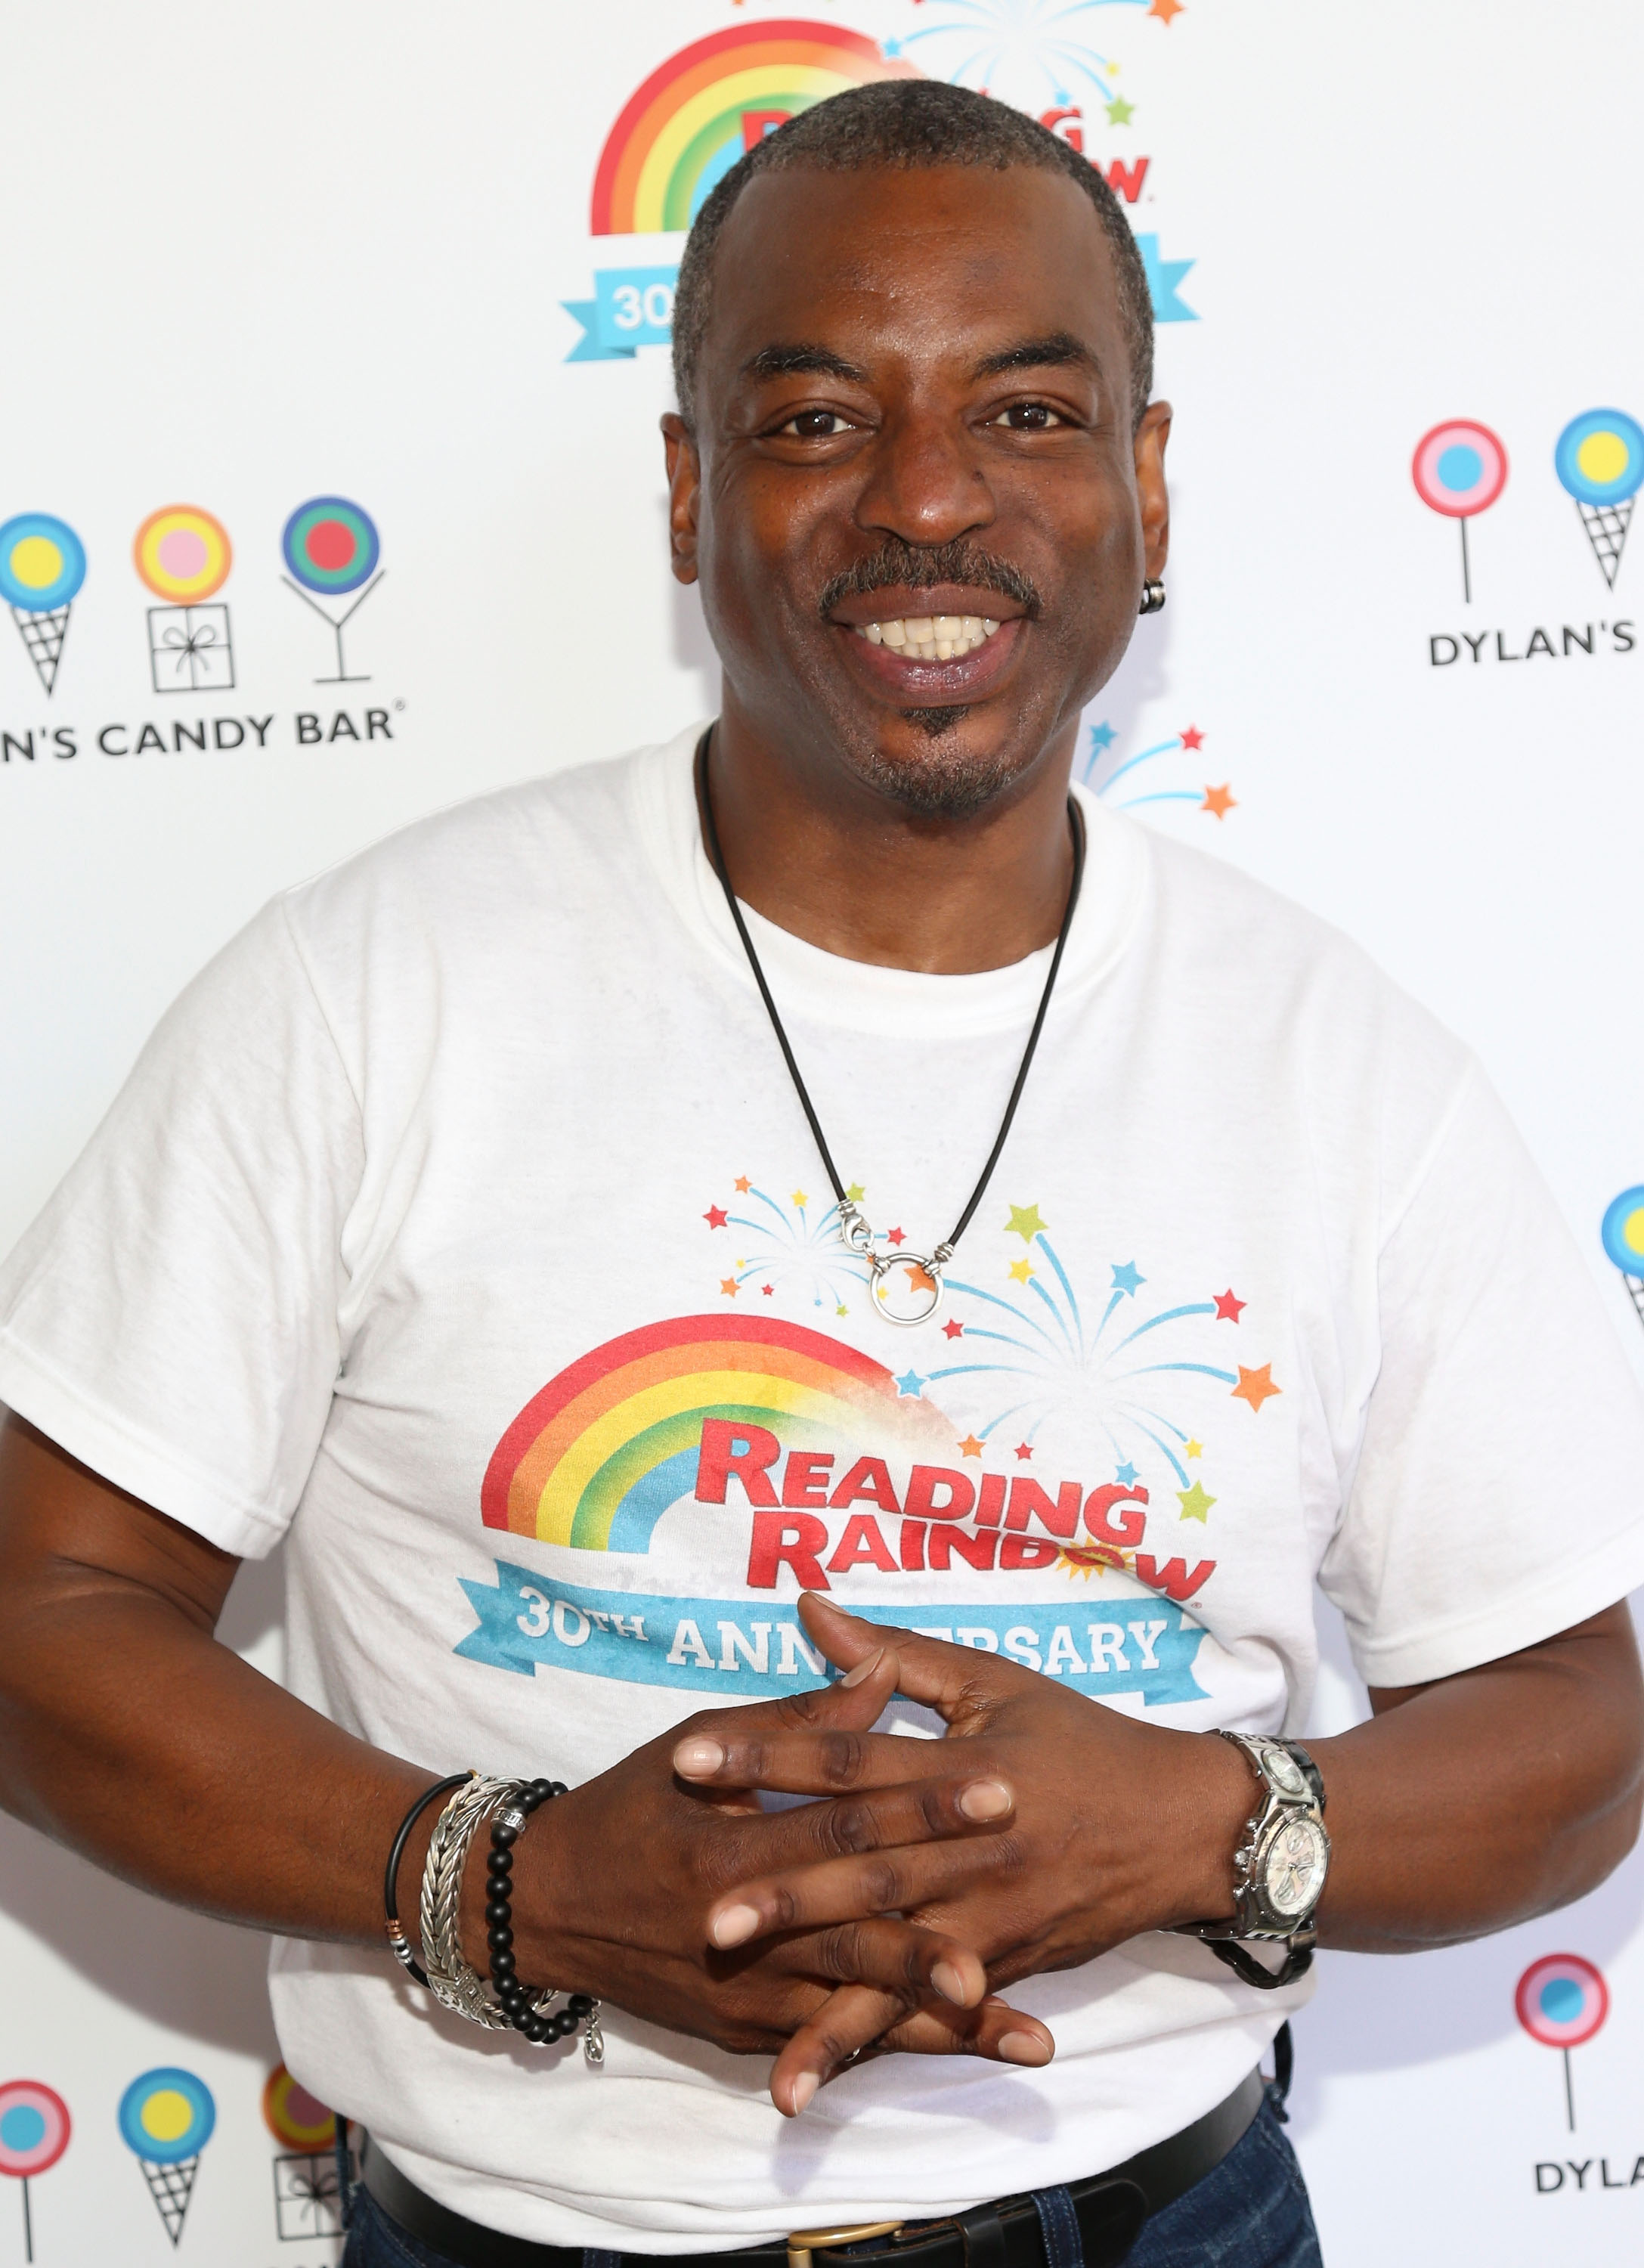 Actor LeVar Burton attends the Reading Rainbow's 30th Anniversary Celebration at Dylan's Candy Bar on June 14, 2013 in Los Angeles, California. (Imeh Akpanudosen / Getty Images)